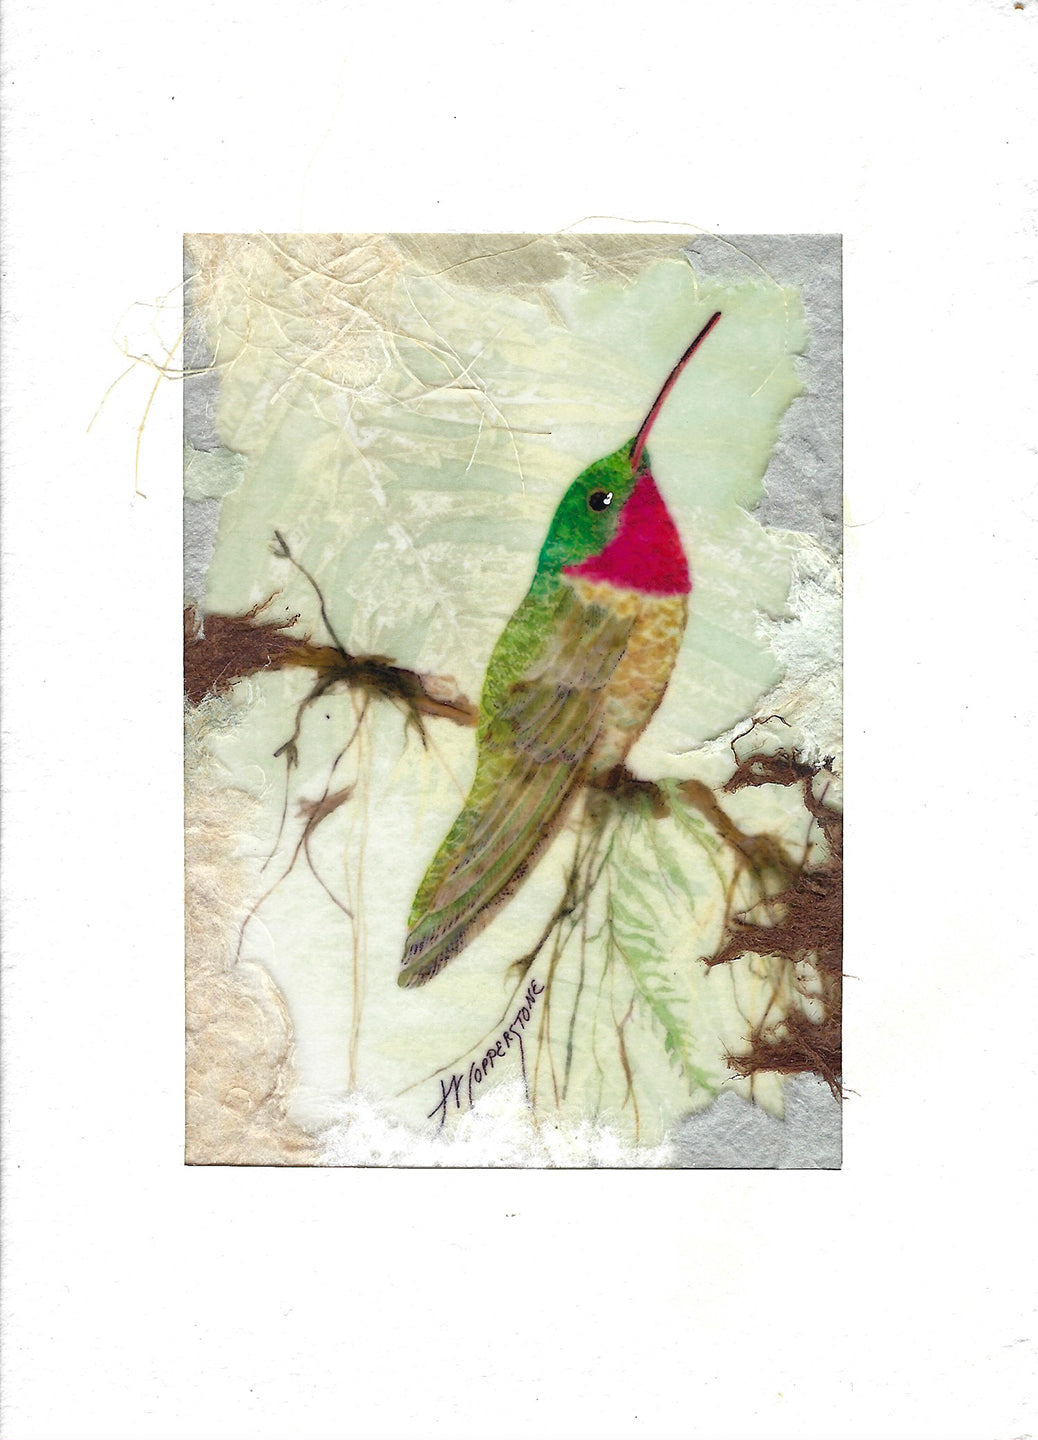 Ruby Throat Hummingbird - Mixed media fine art print by Janice A. Copperstone of Milford, Mich.  